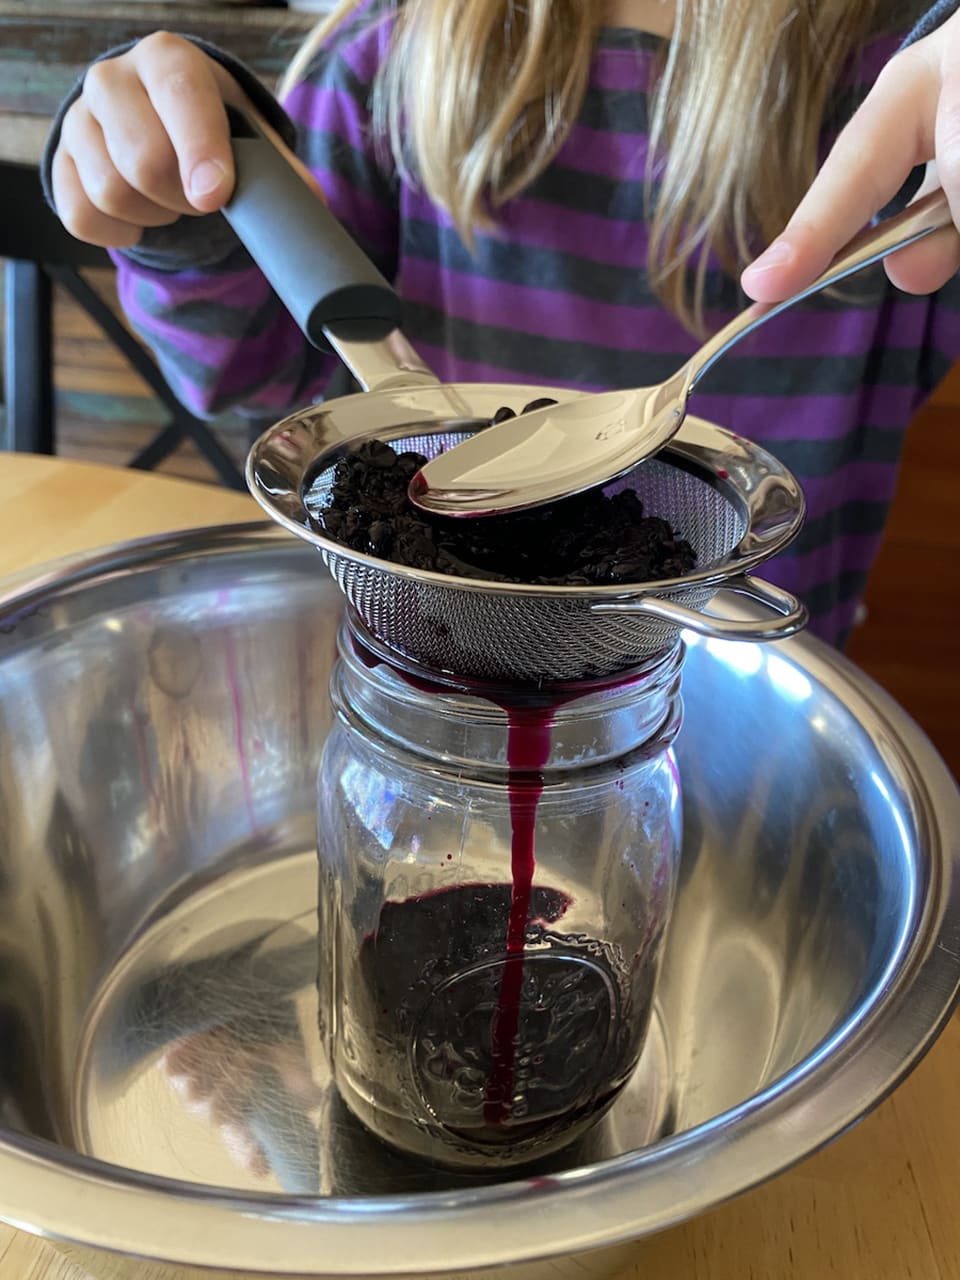 Straining the pokeberries to create a stain